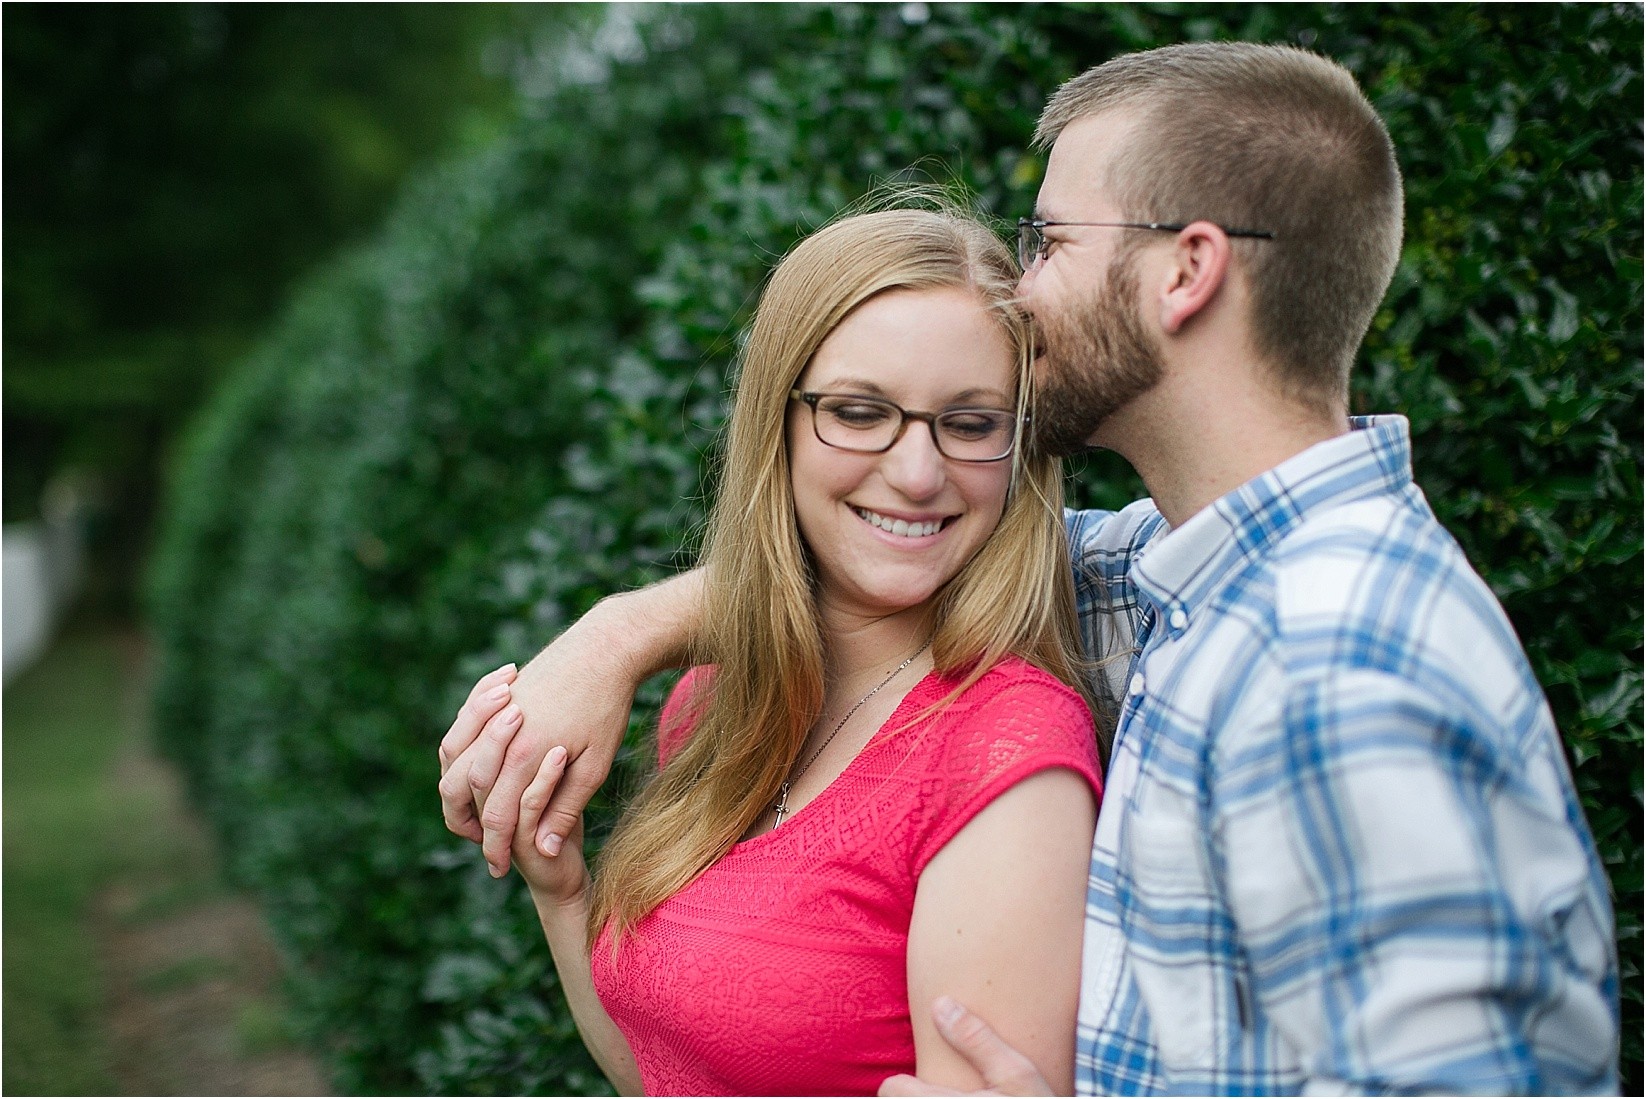 during Andria & Matts Mount Pleasant engagement session in downtown mount pleasant nc